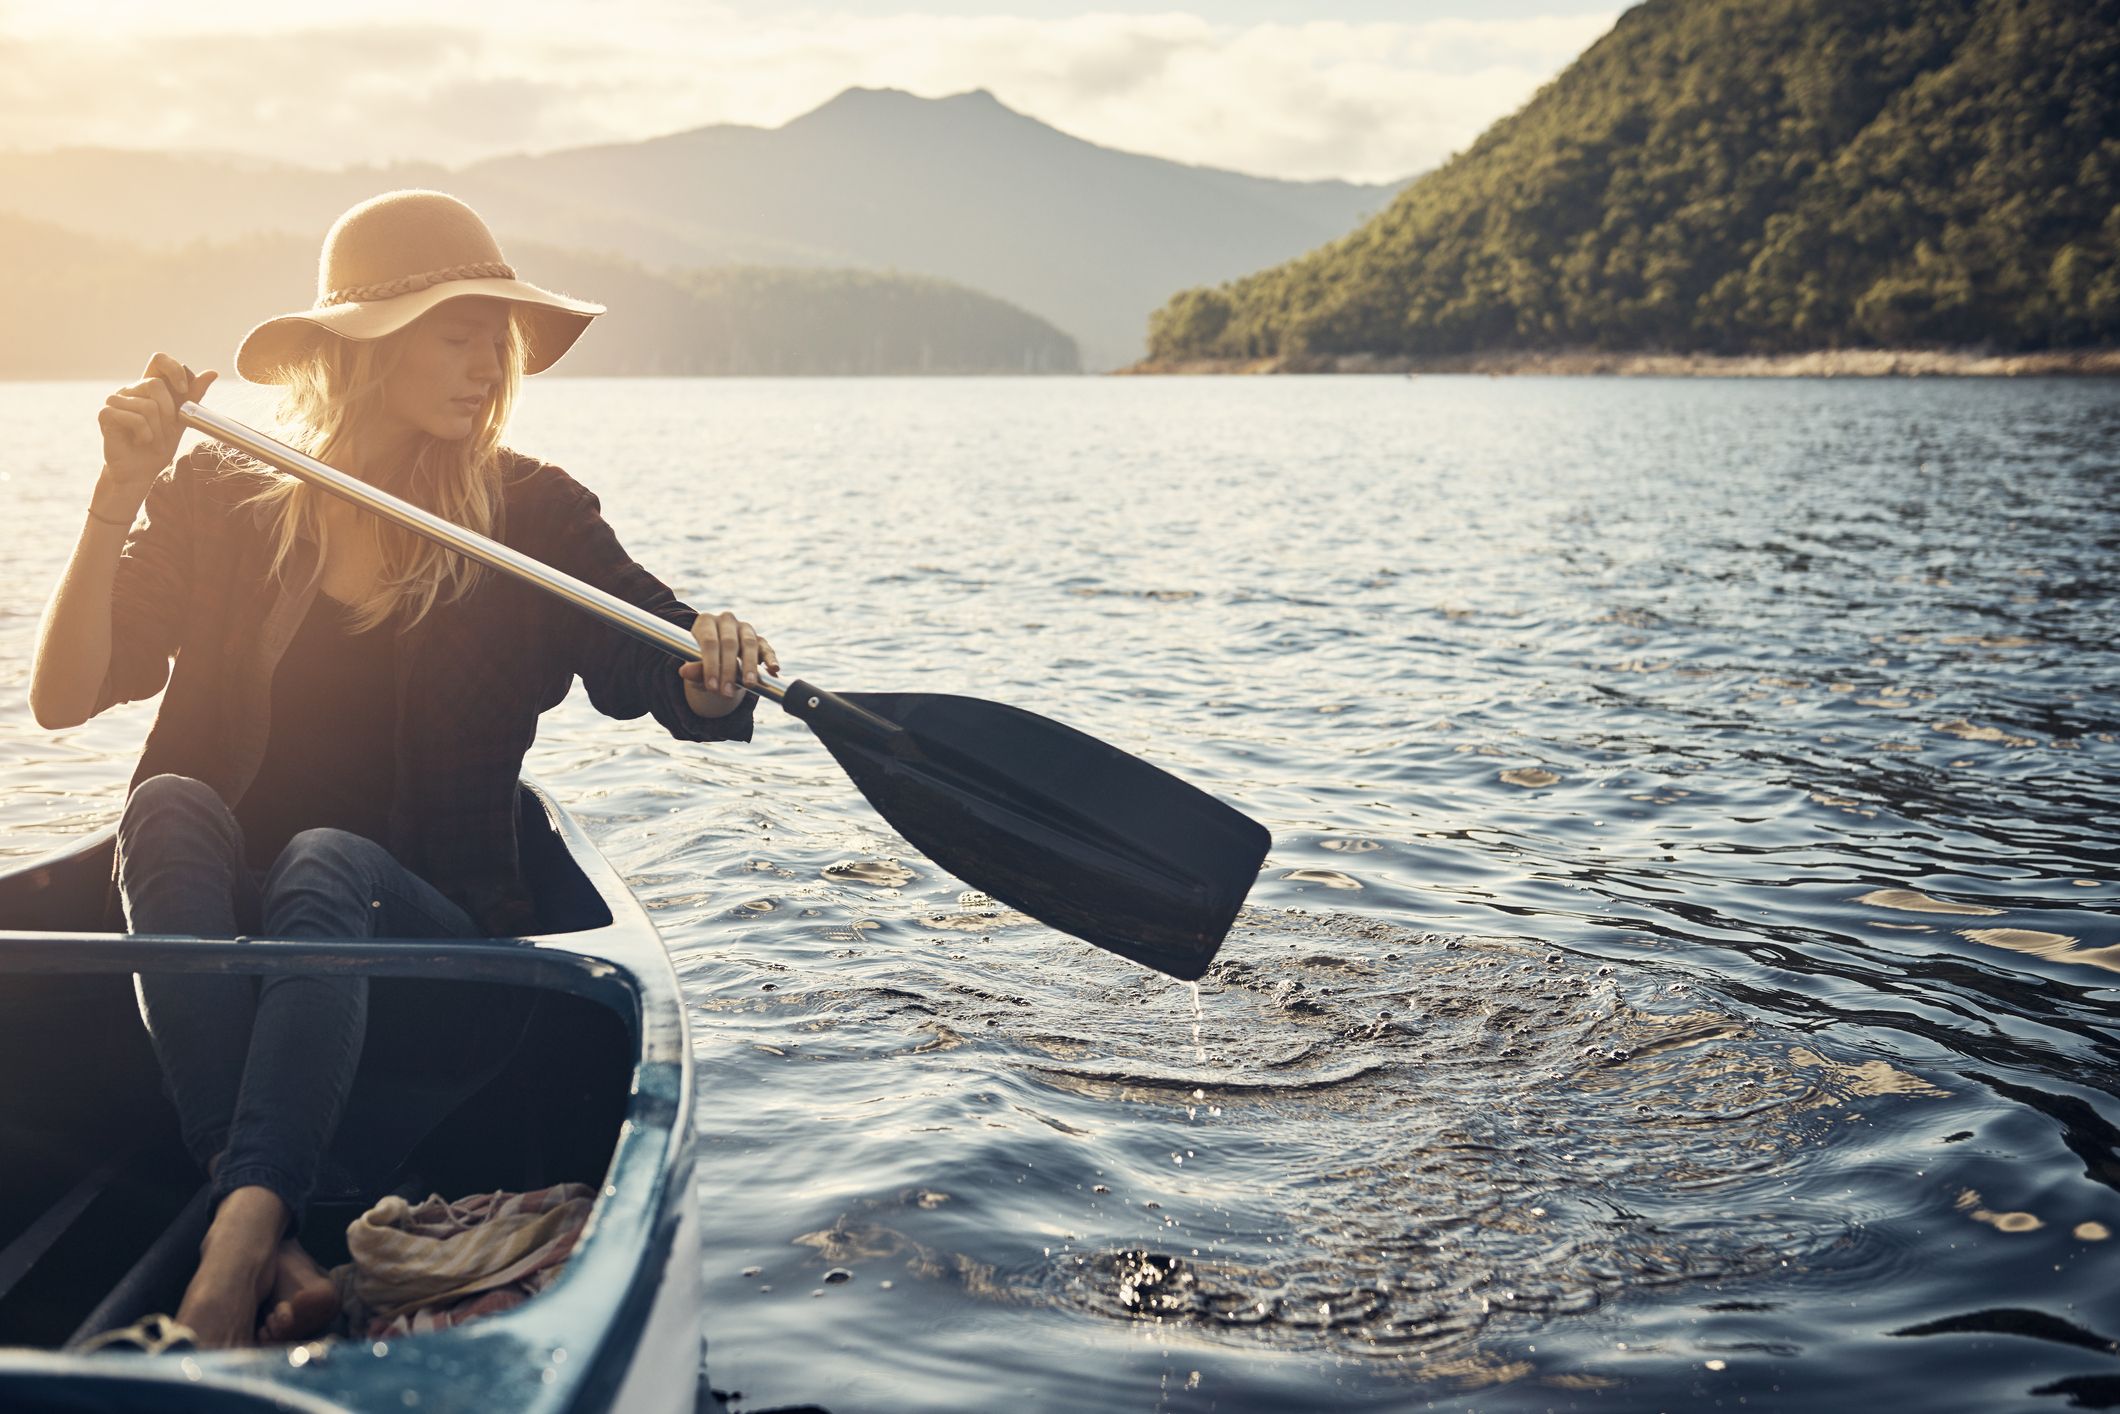 A woman boating on a lake for self-care and solitude